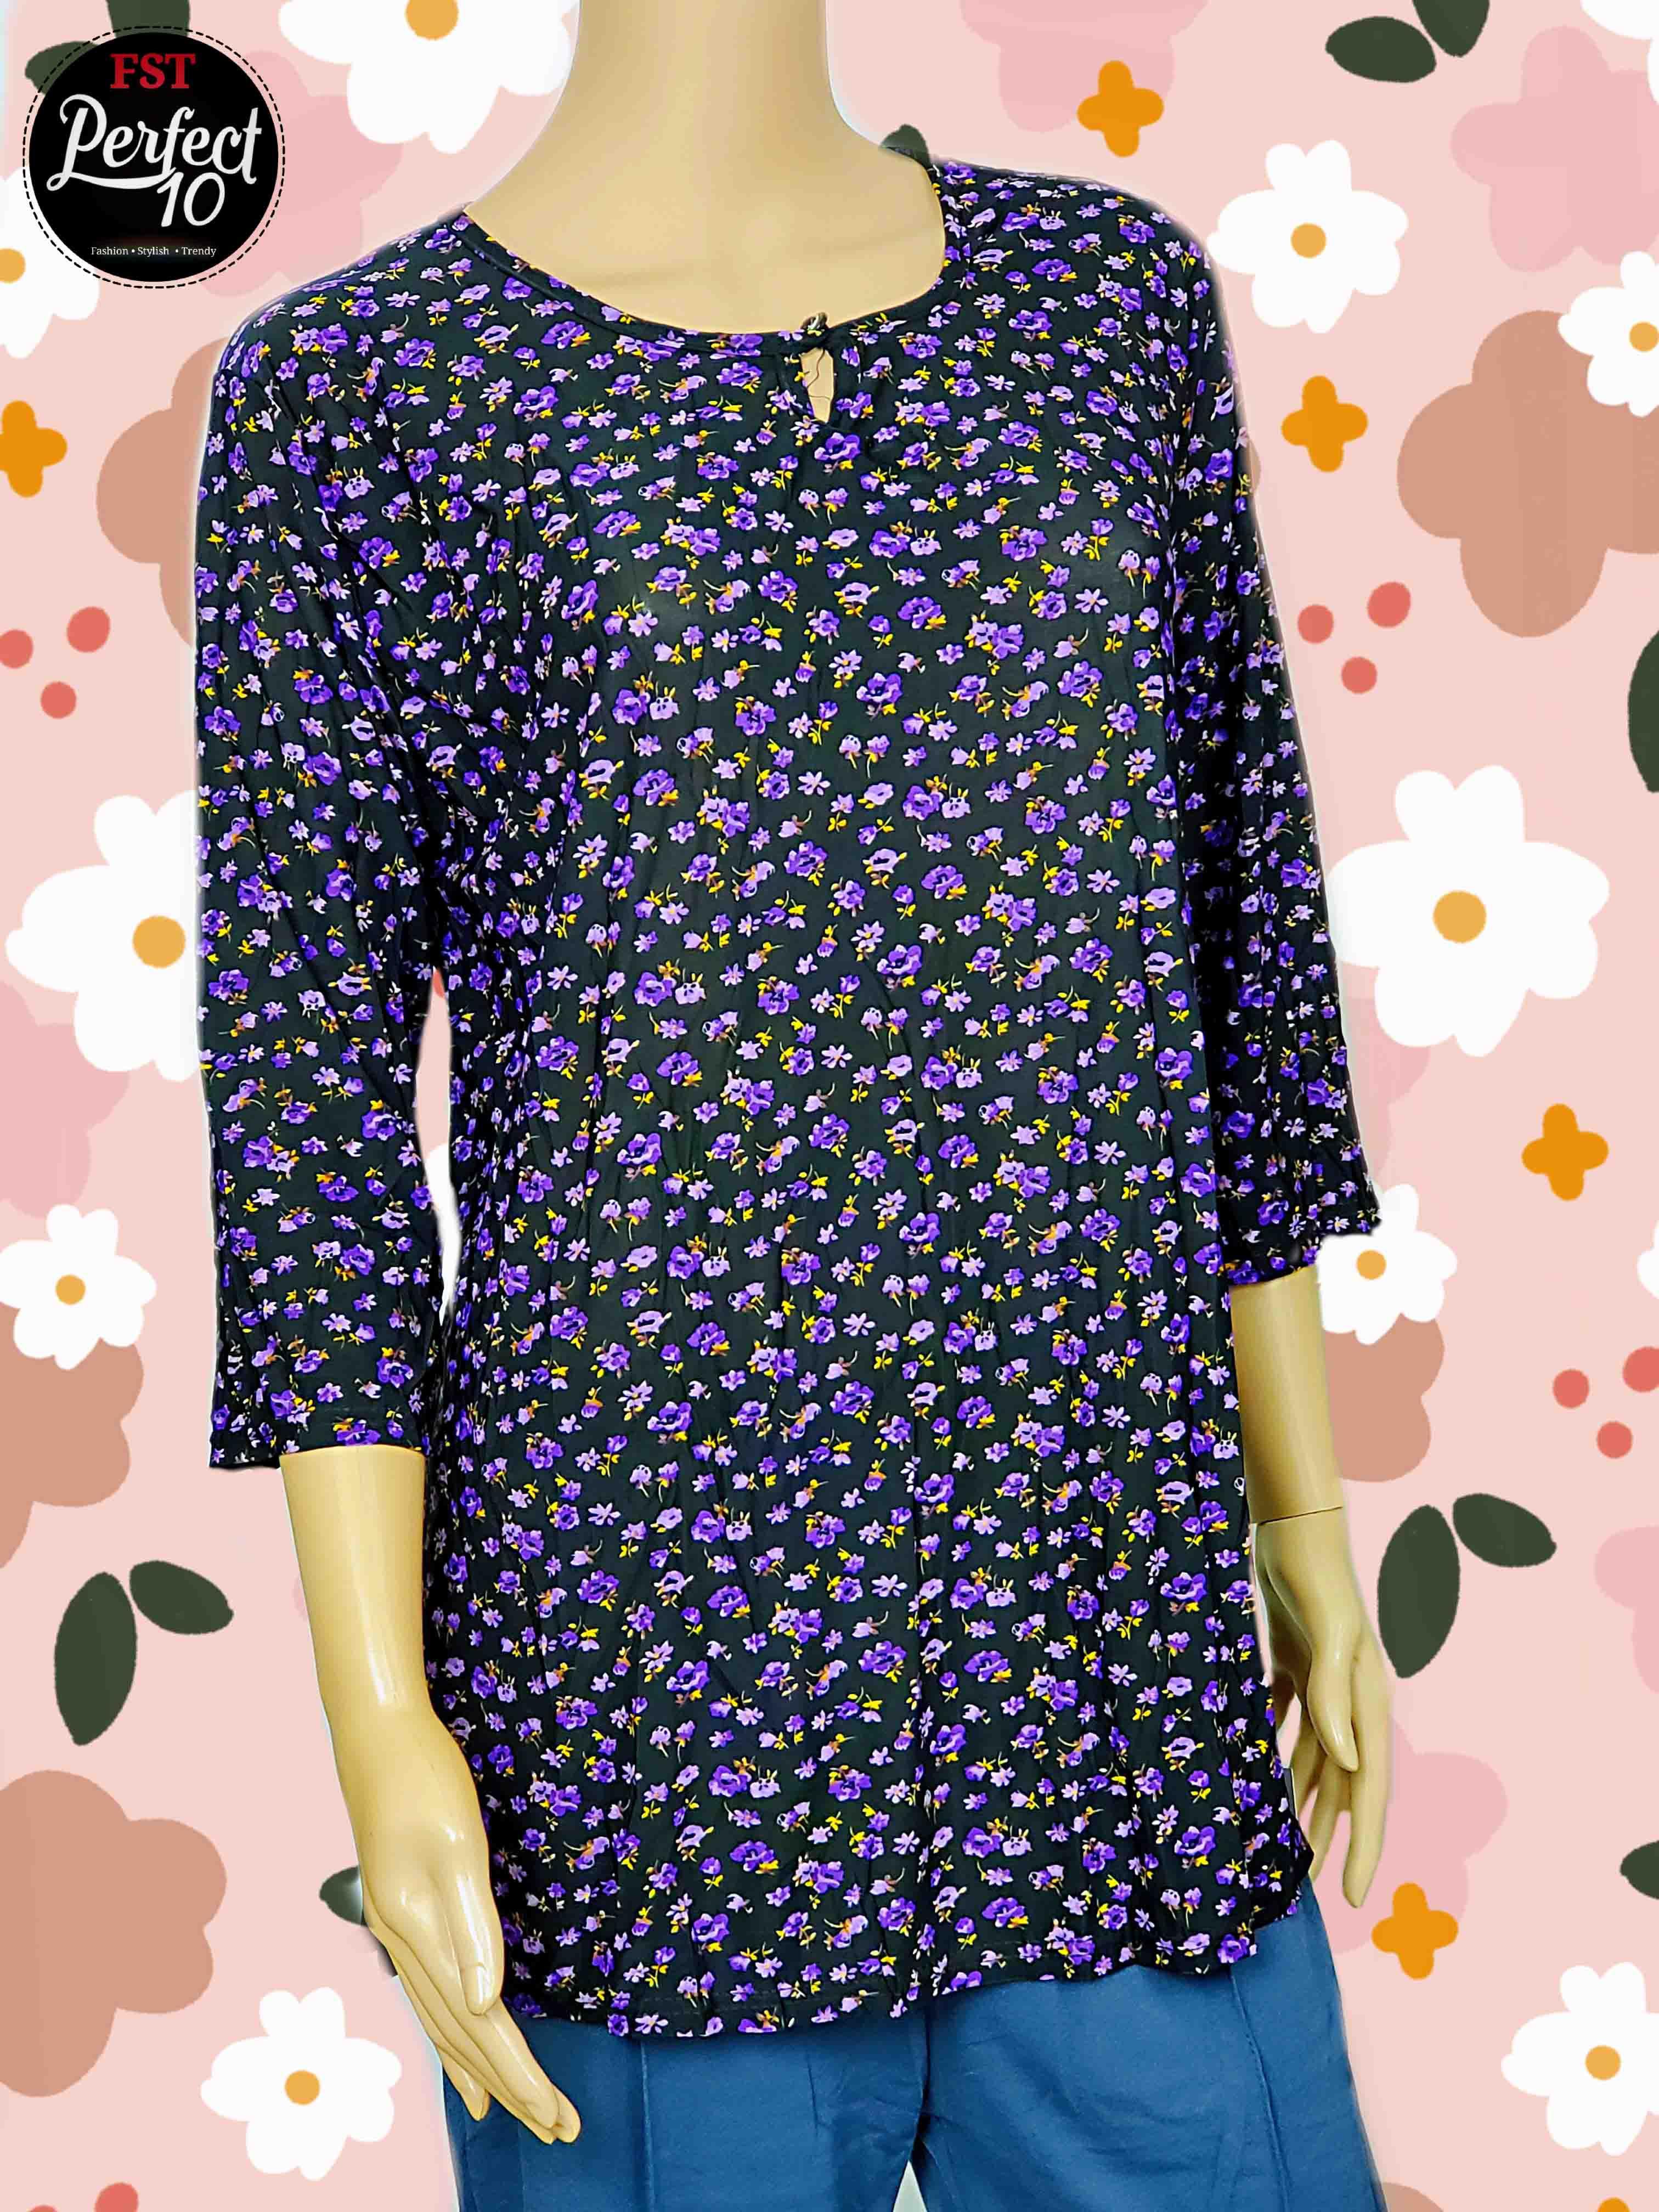 FST Floral Blouse With Front Button [119-2] - 4 Sizes (3 Colors)